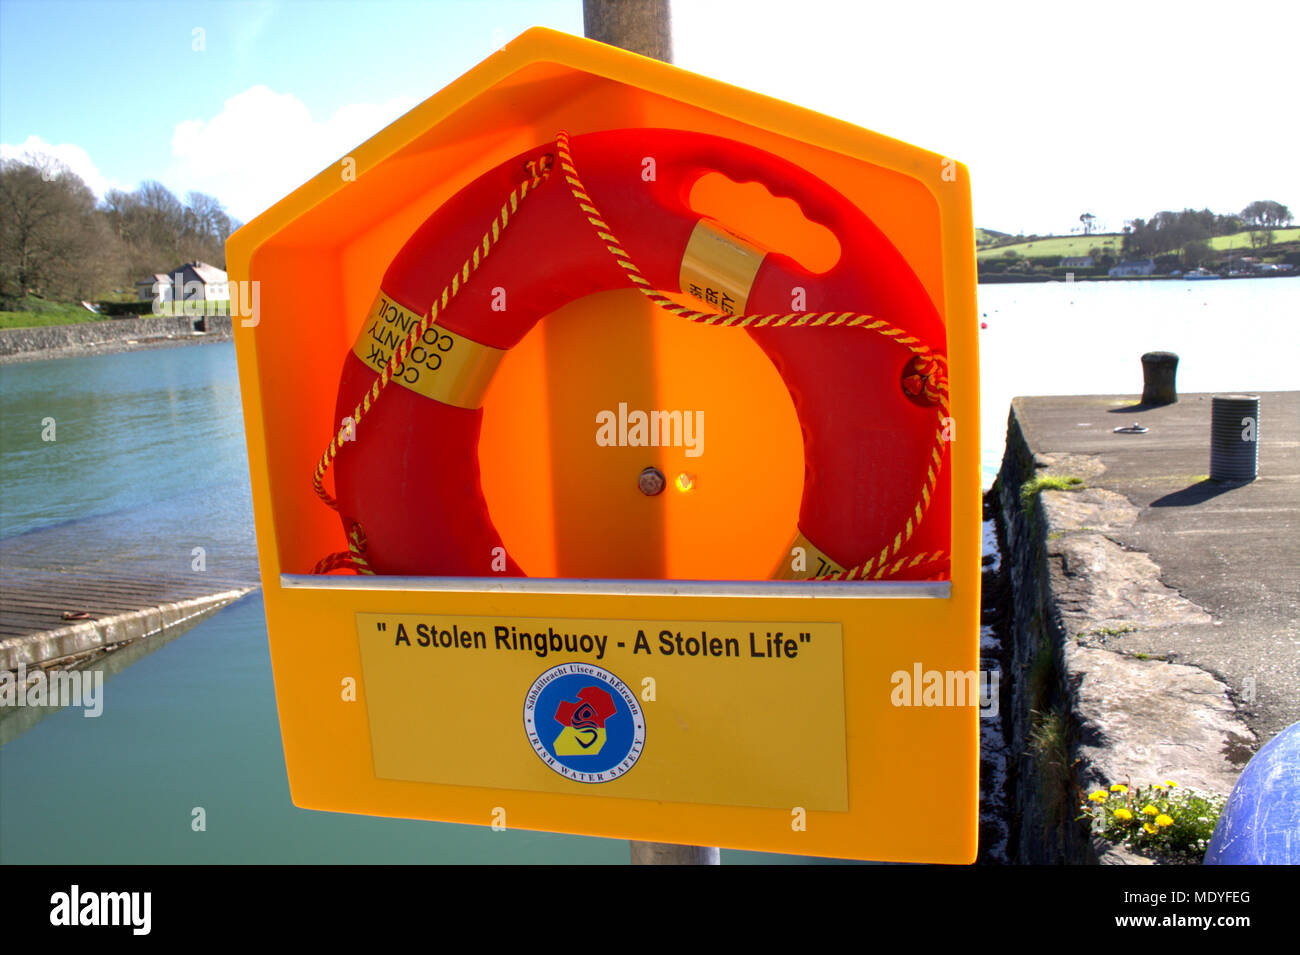 brand new lifebuoy ring mounted on a pole by the side of a slipway and pier, ready to be used to stop people drowning. Stock Photo